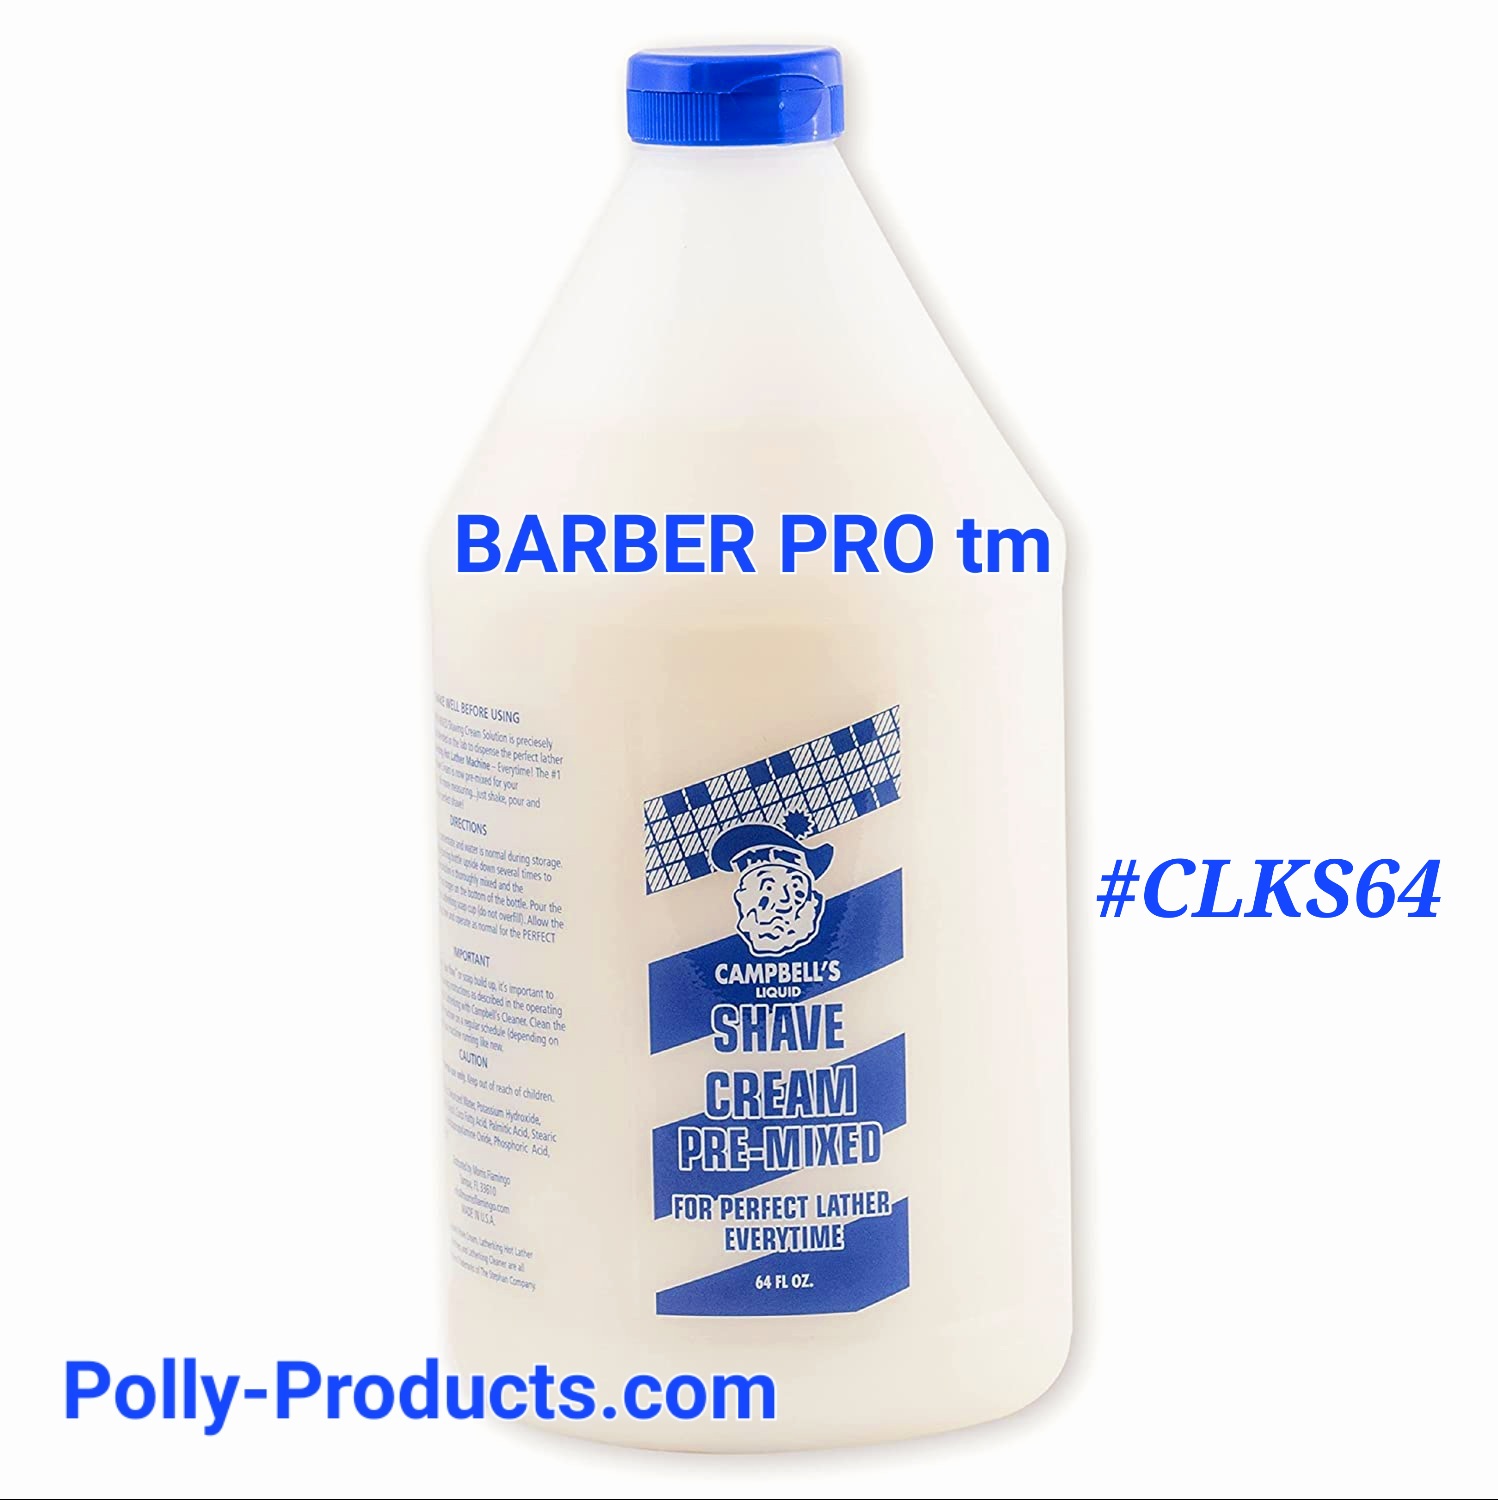 #CLKS64 HALF GALLON CAMPBELL'S LATHER KING PRE-MIXED SHAVE CREAM FROM BARBER PRO TM 